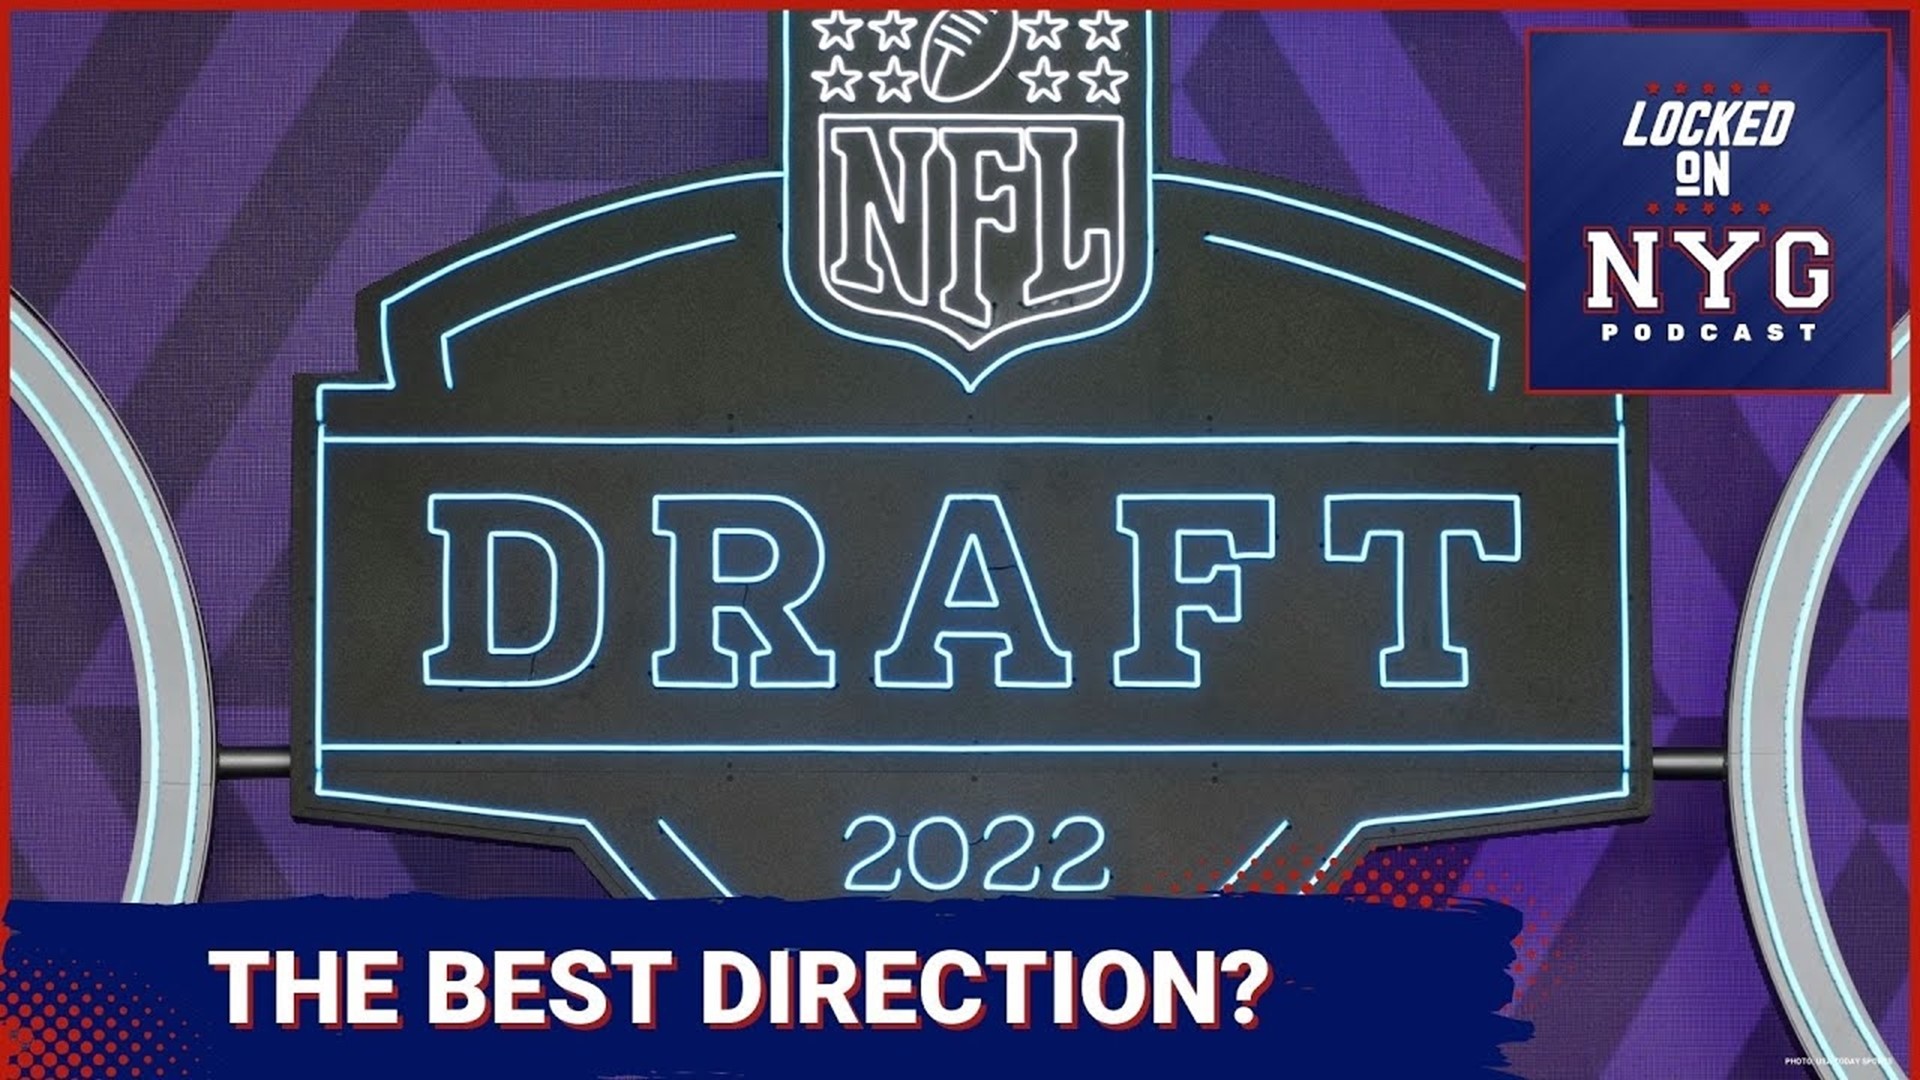 How to live stream the 2020 NFL Draft on Roku devices